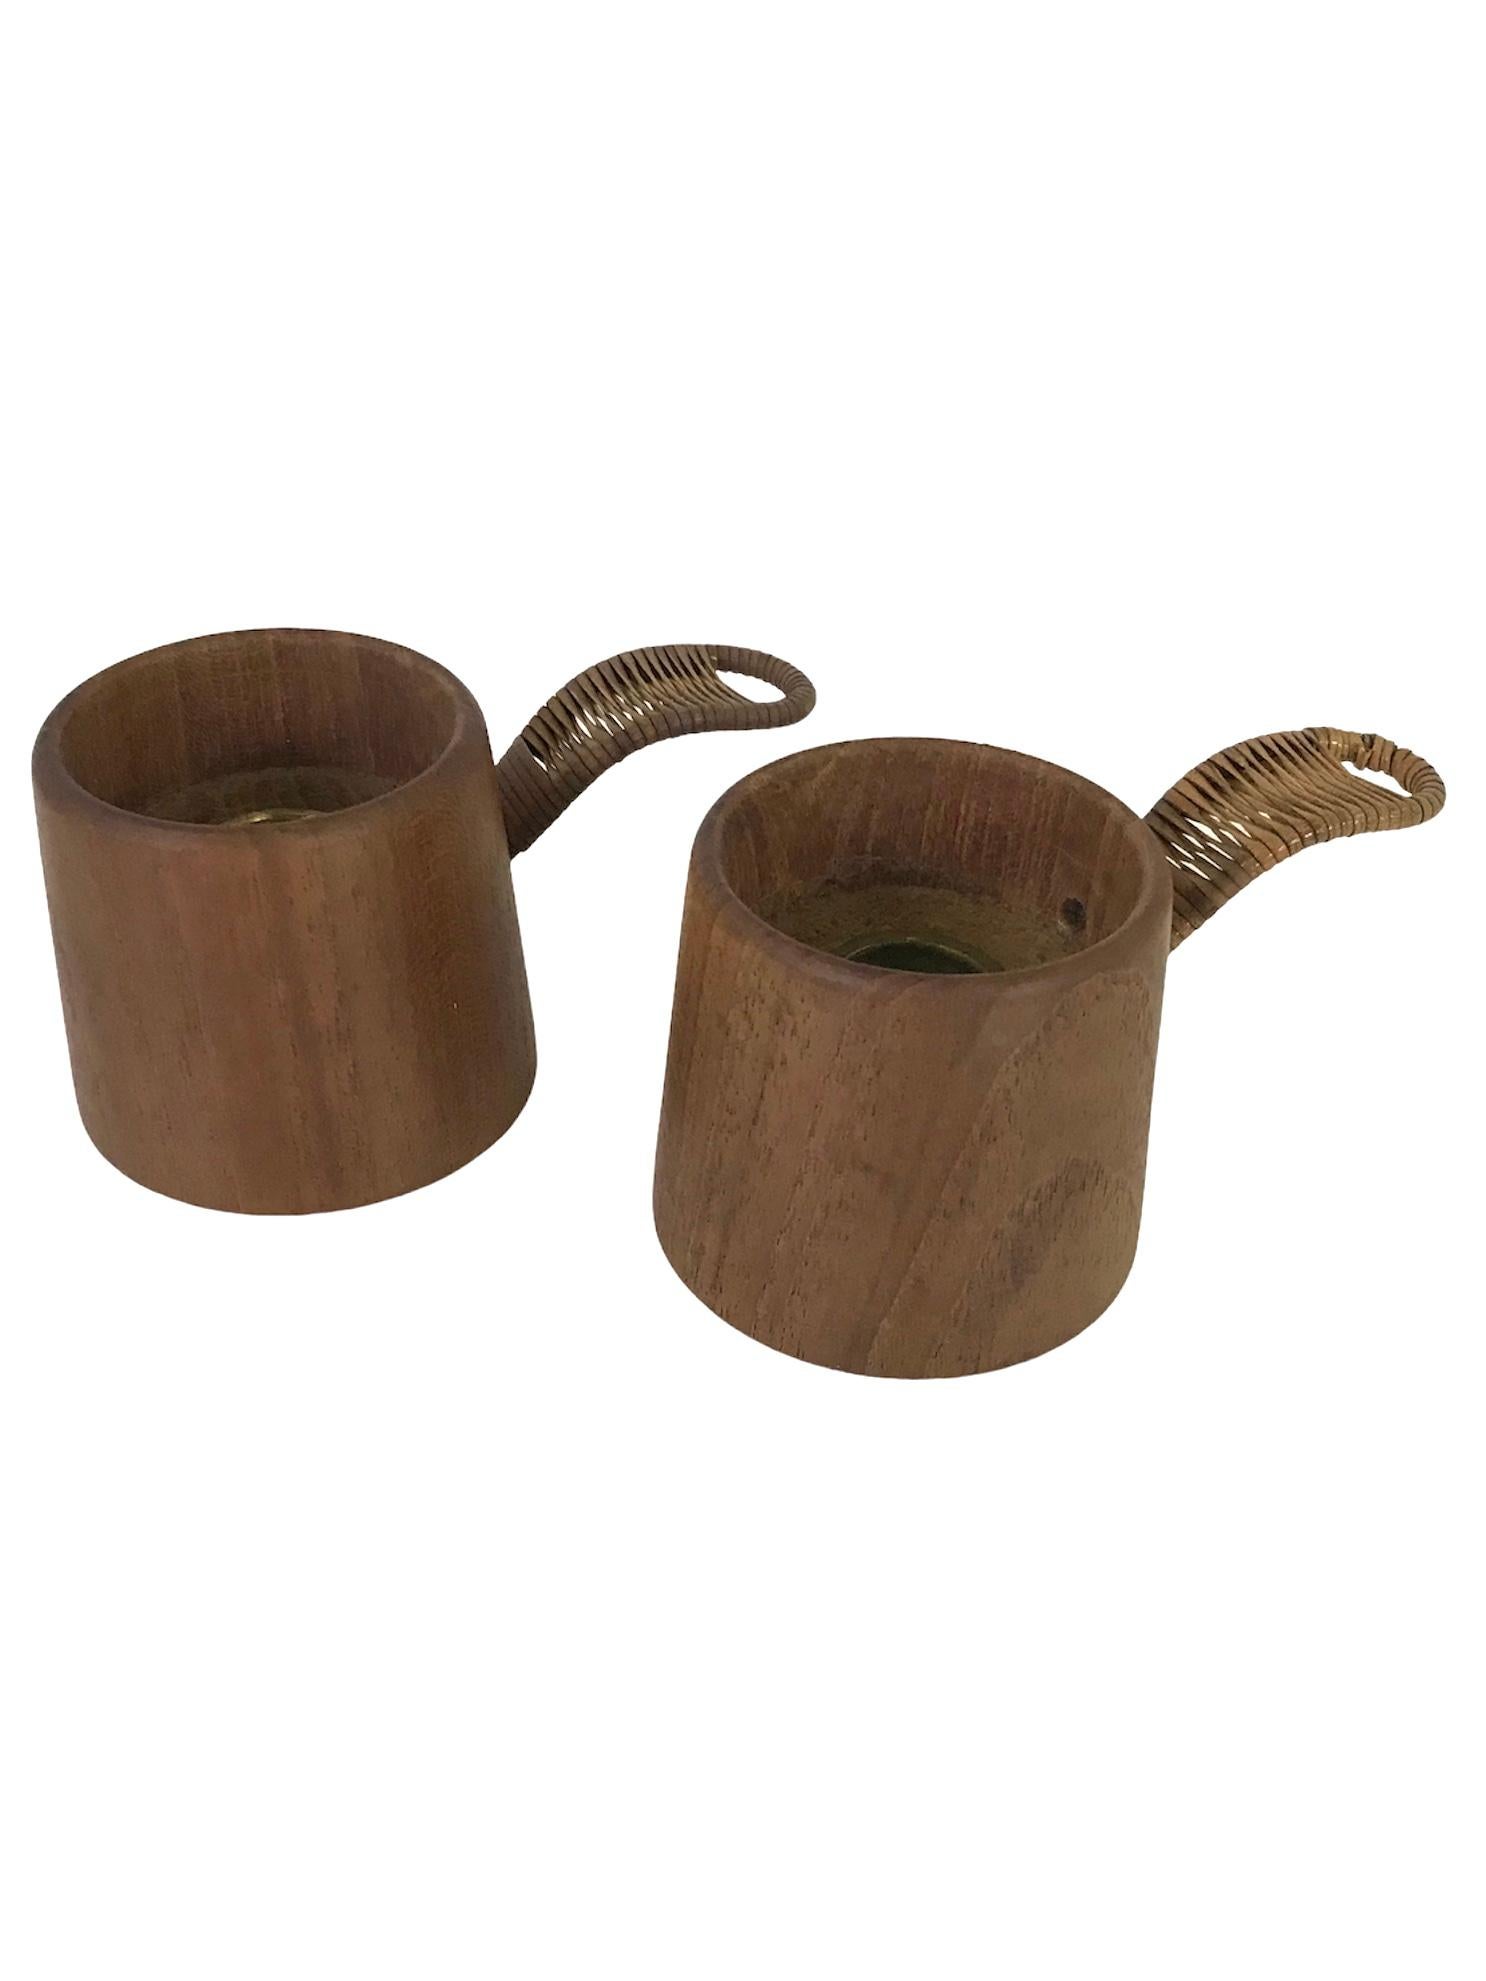 Fantastic pair of Scandinavian Mid-Century Modern Teak & Raffia 1960s candleholders. Purchased in Sweden in the 1980s. Made of solid turned teak and handle with wrapped raffia.

Measurements: 4 5/8 inches wide w. handle x 2 1/2 inches diameter top